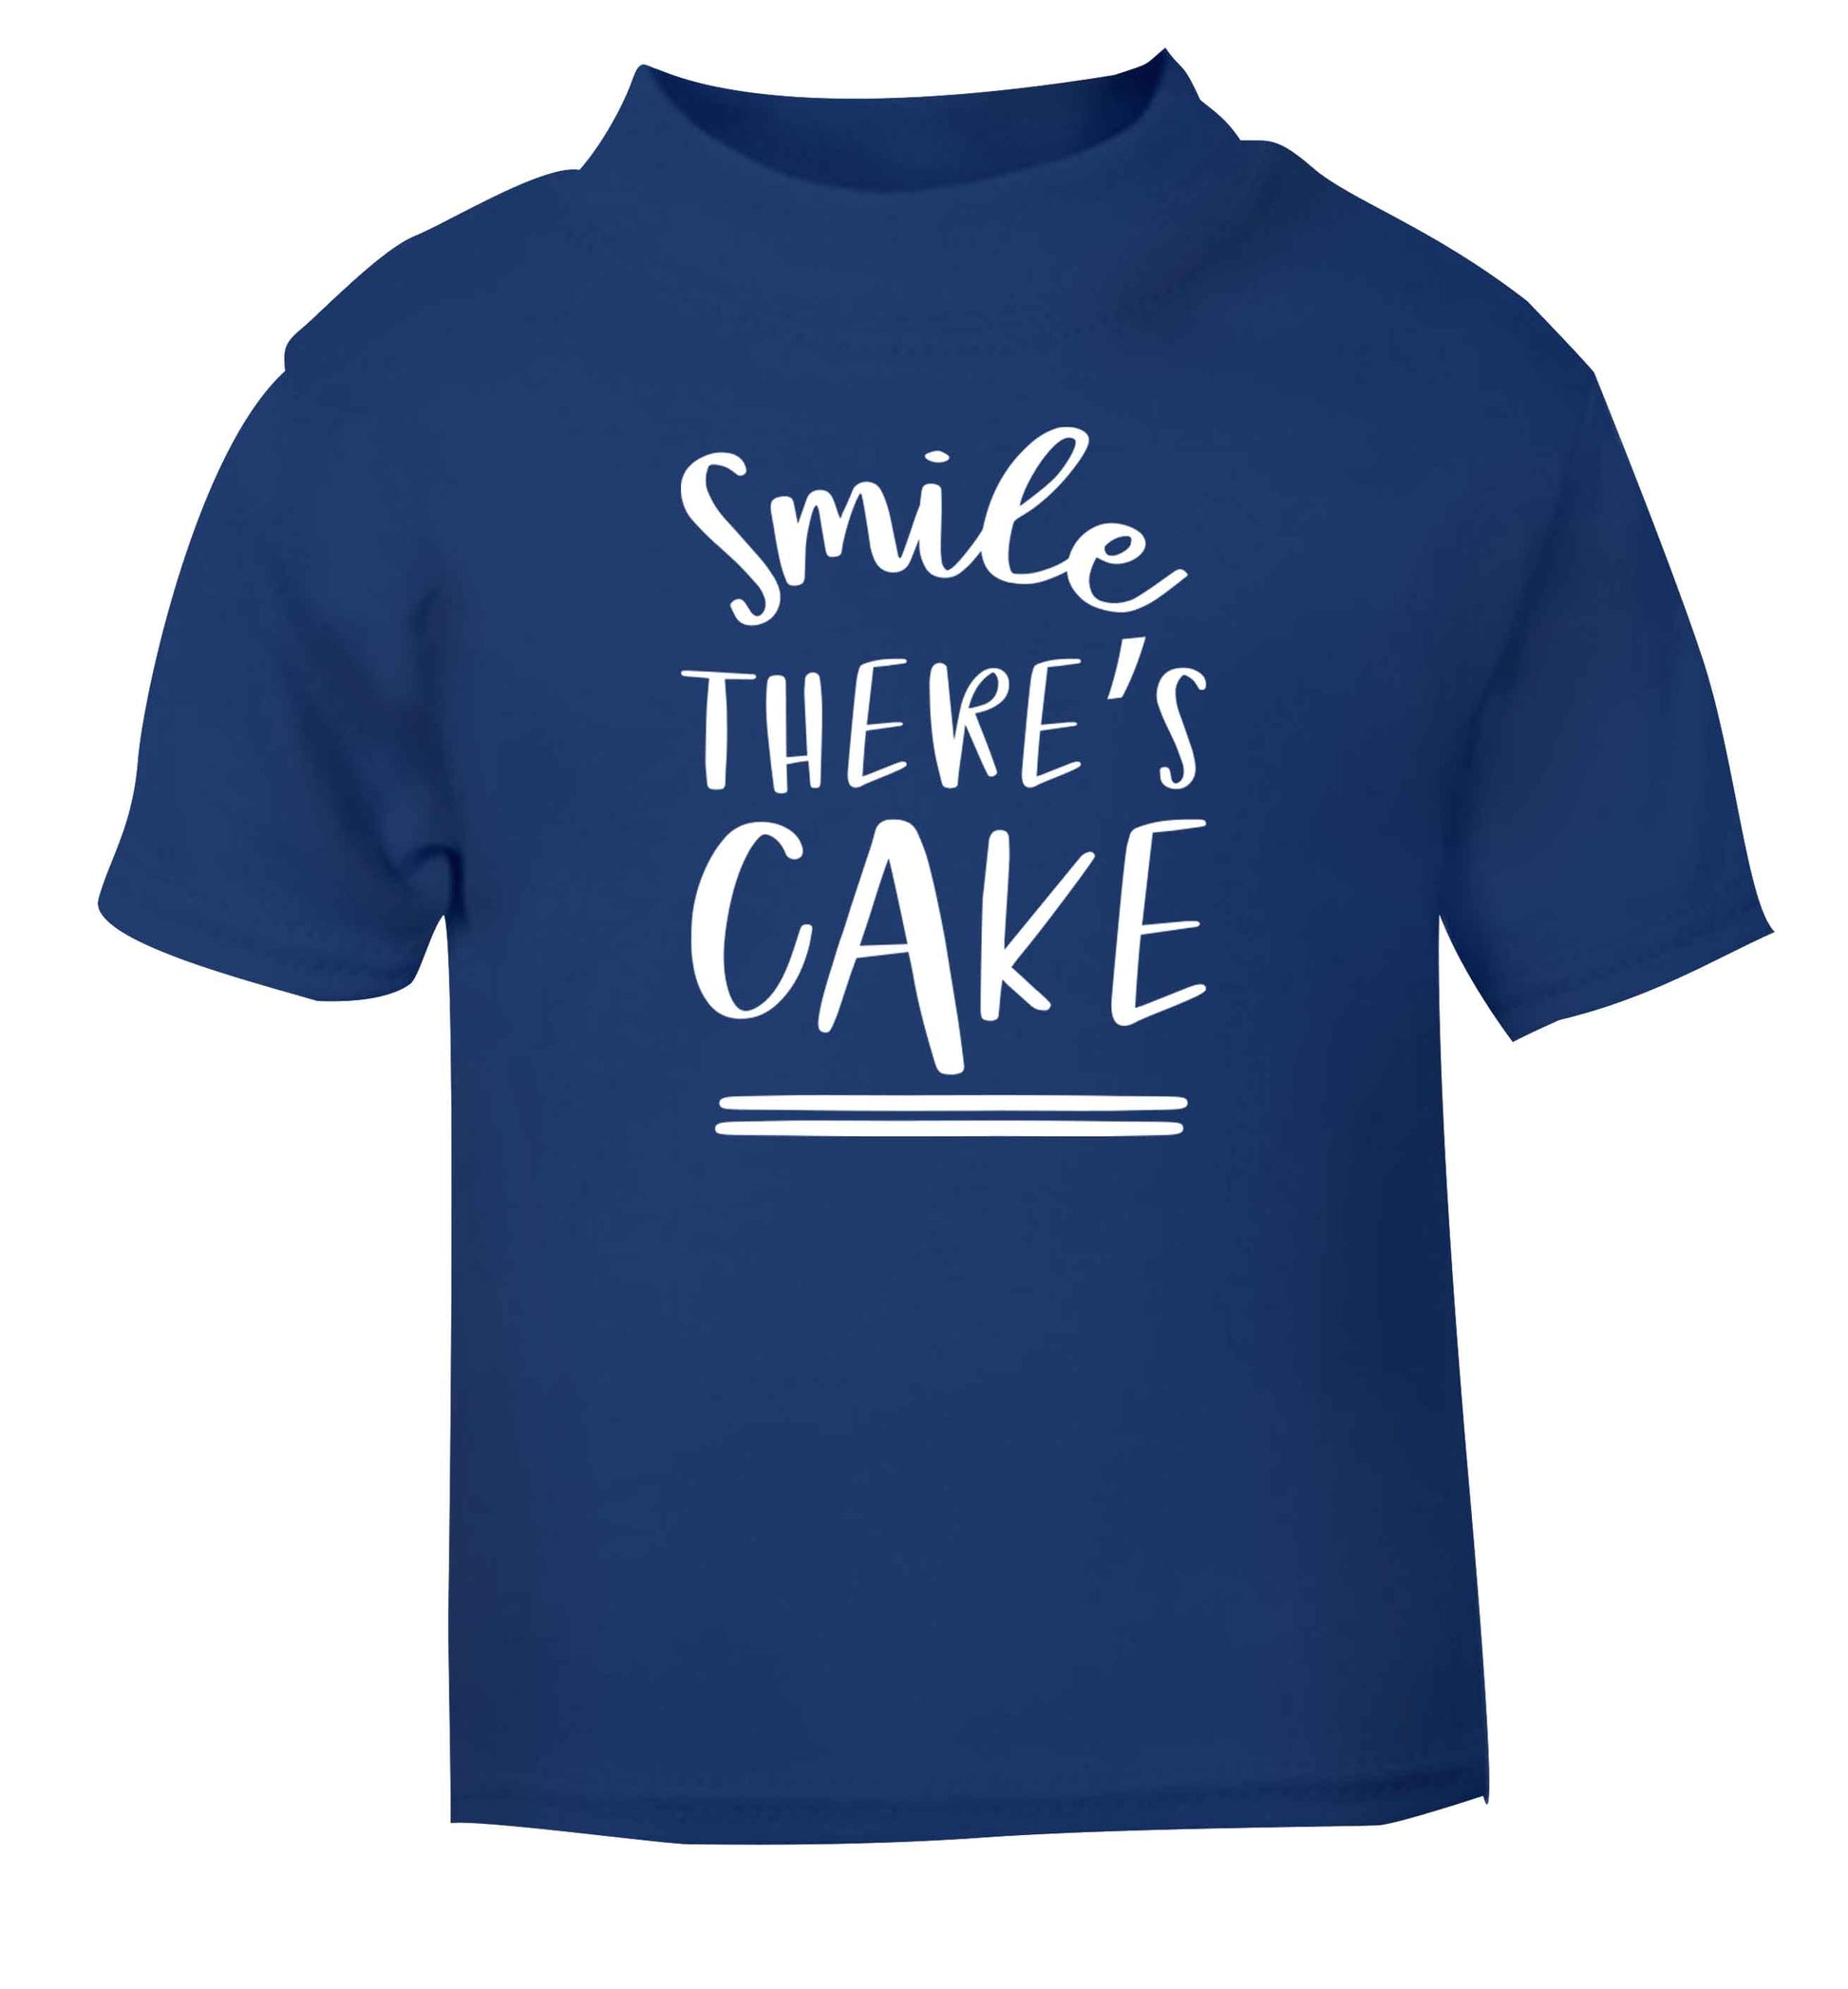 Smile there's cake blue Baby Toddler Tshirt 2 Years